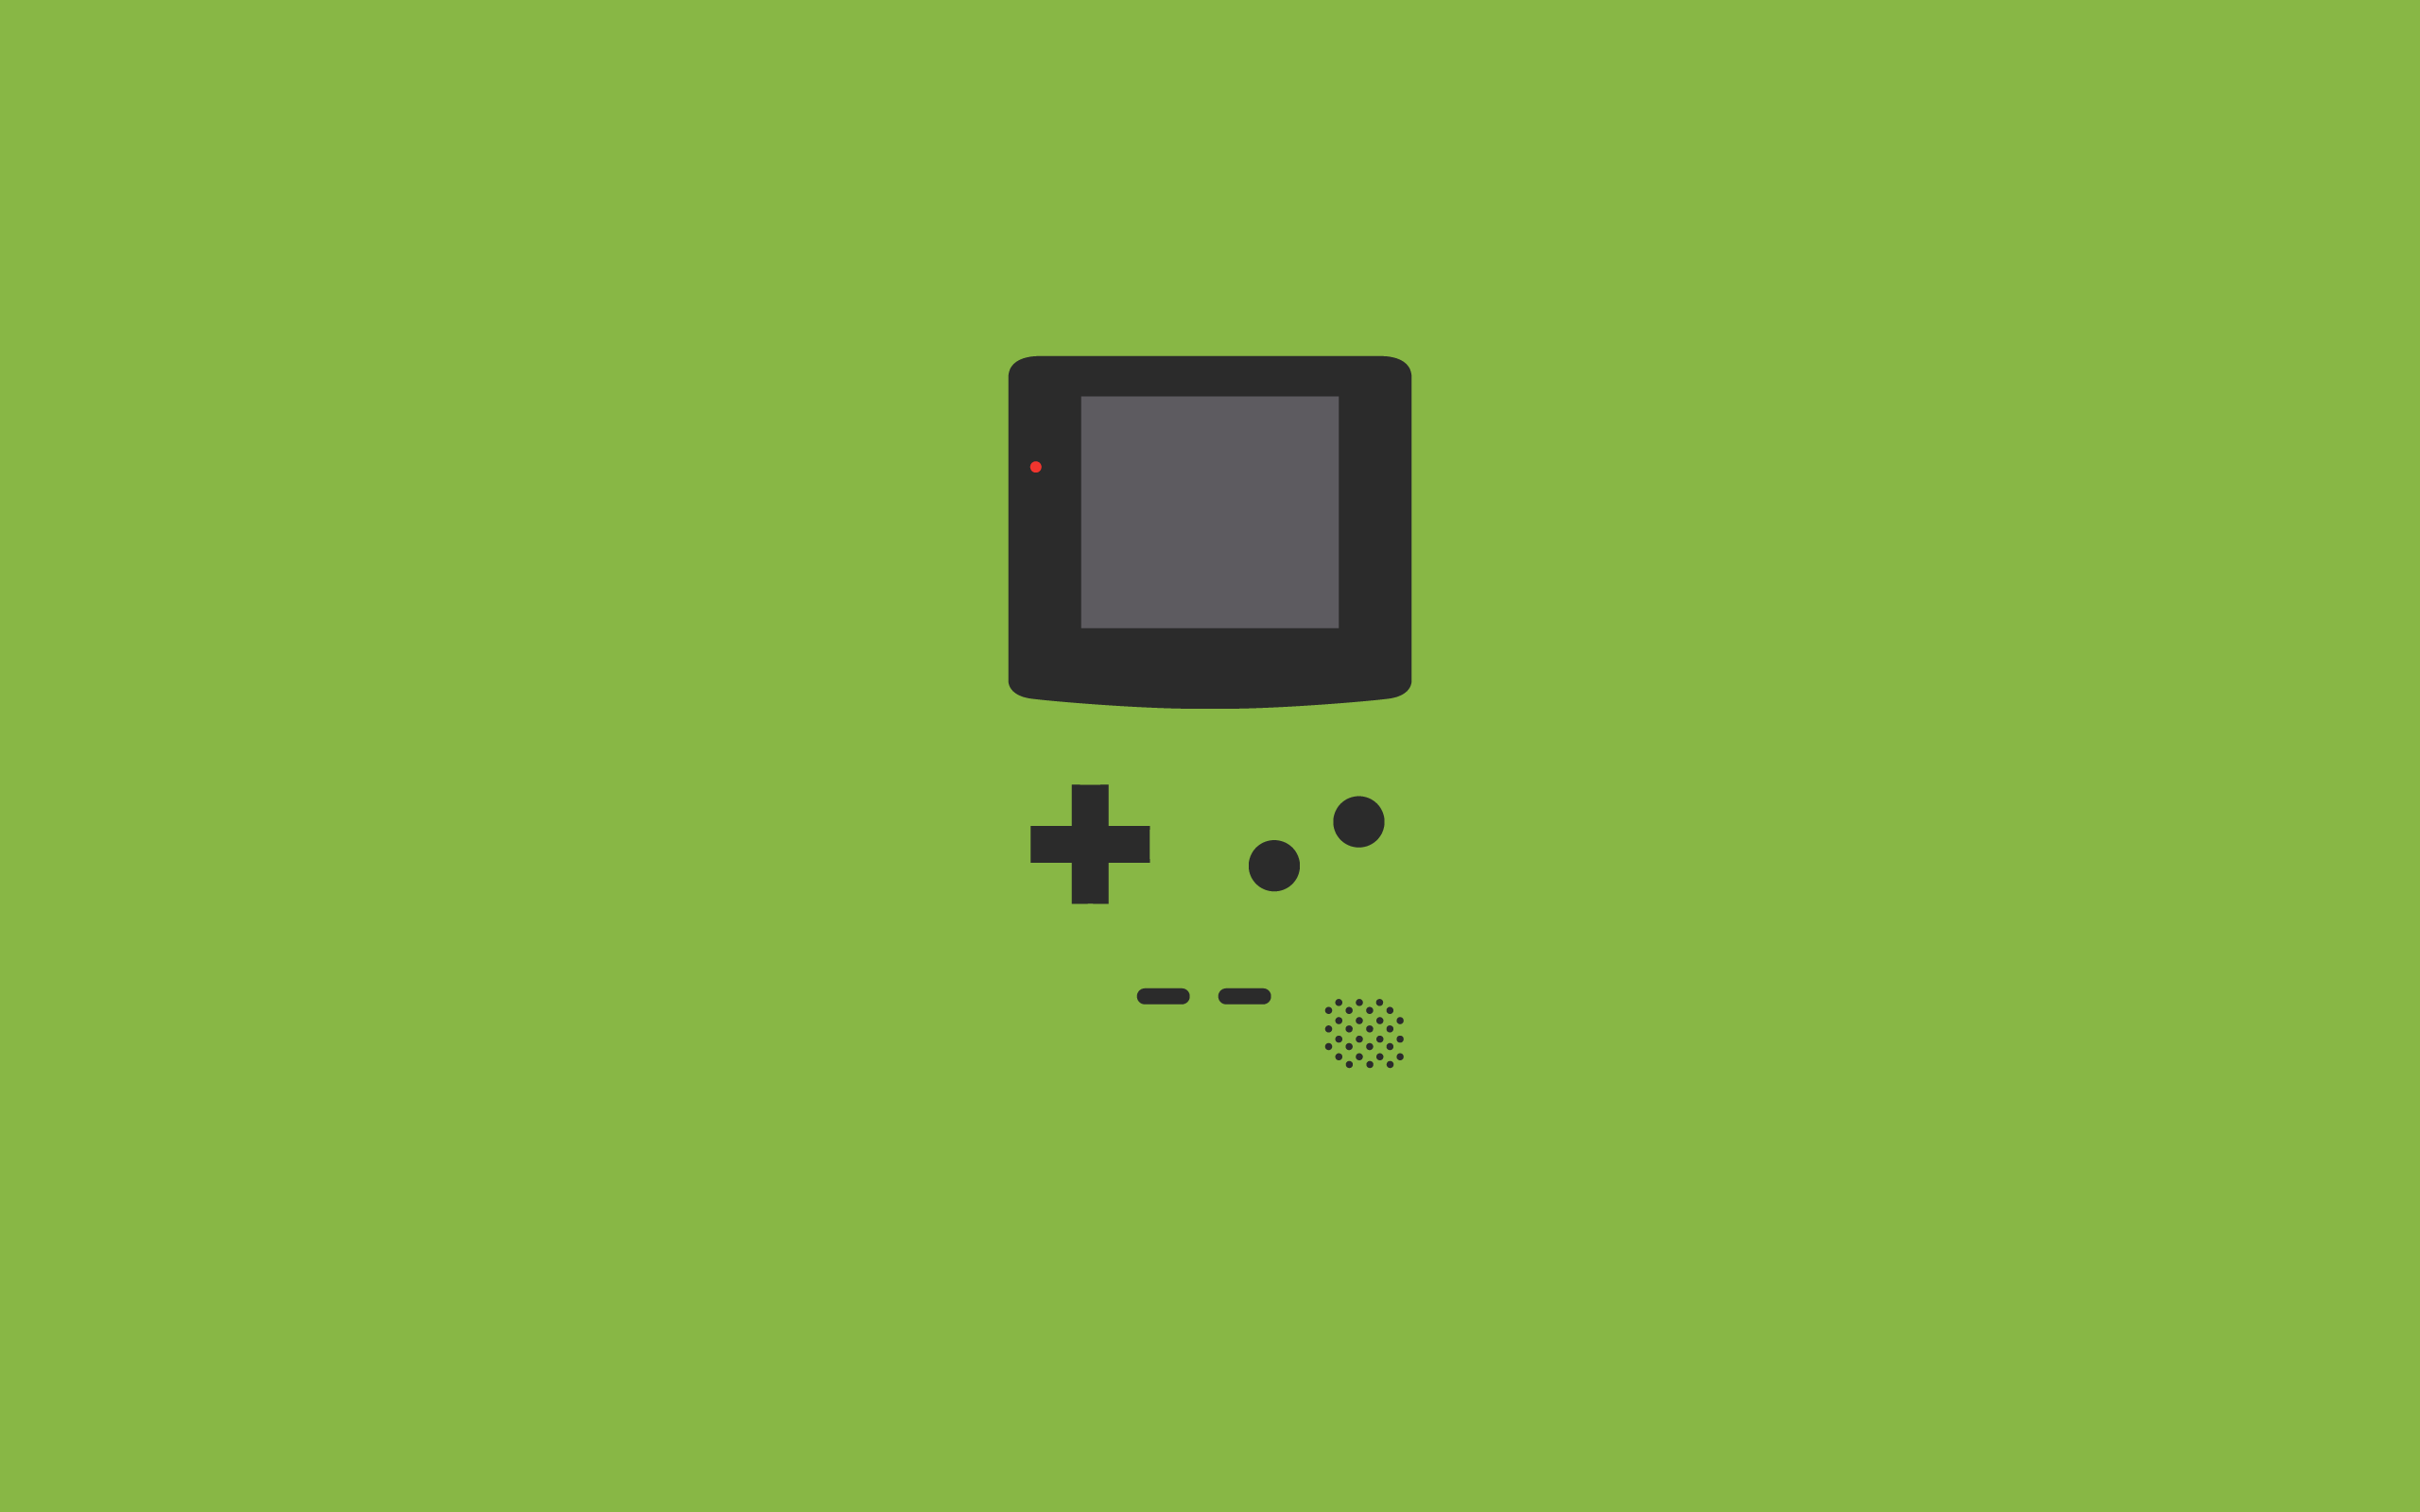 General 2560x1600 minimalism GameBoy Color video games video game art green background simple background green